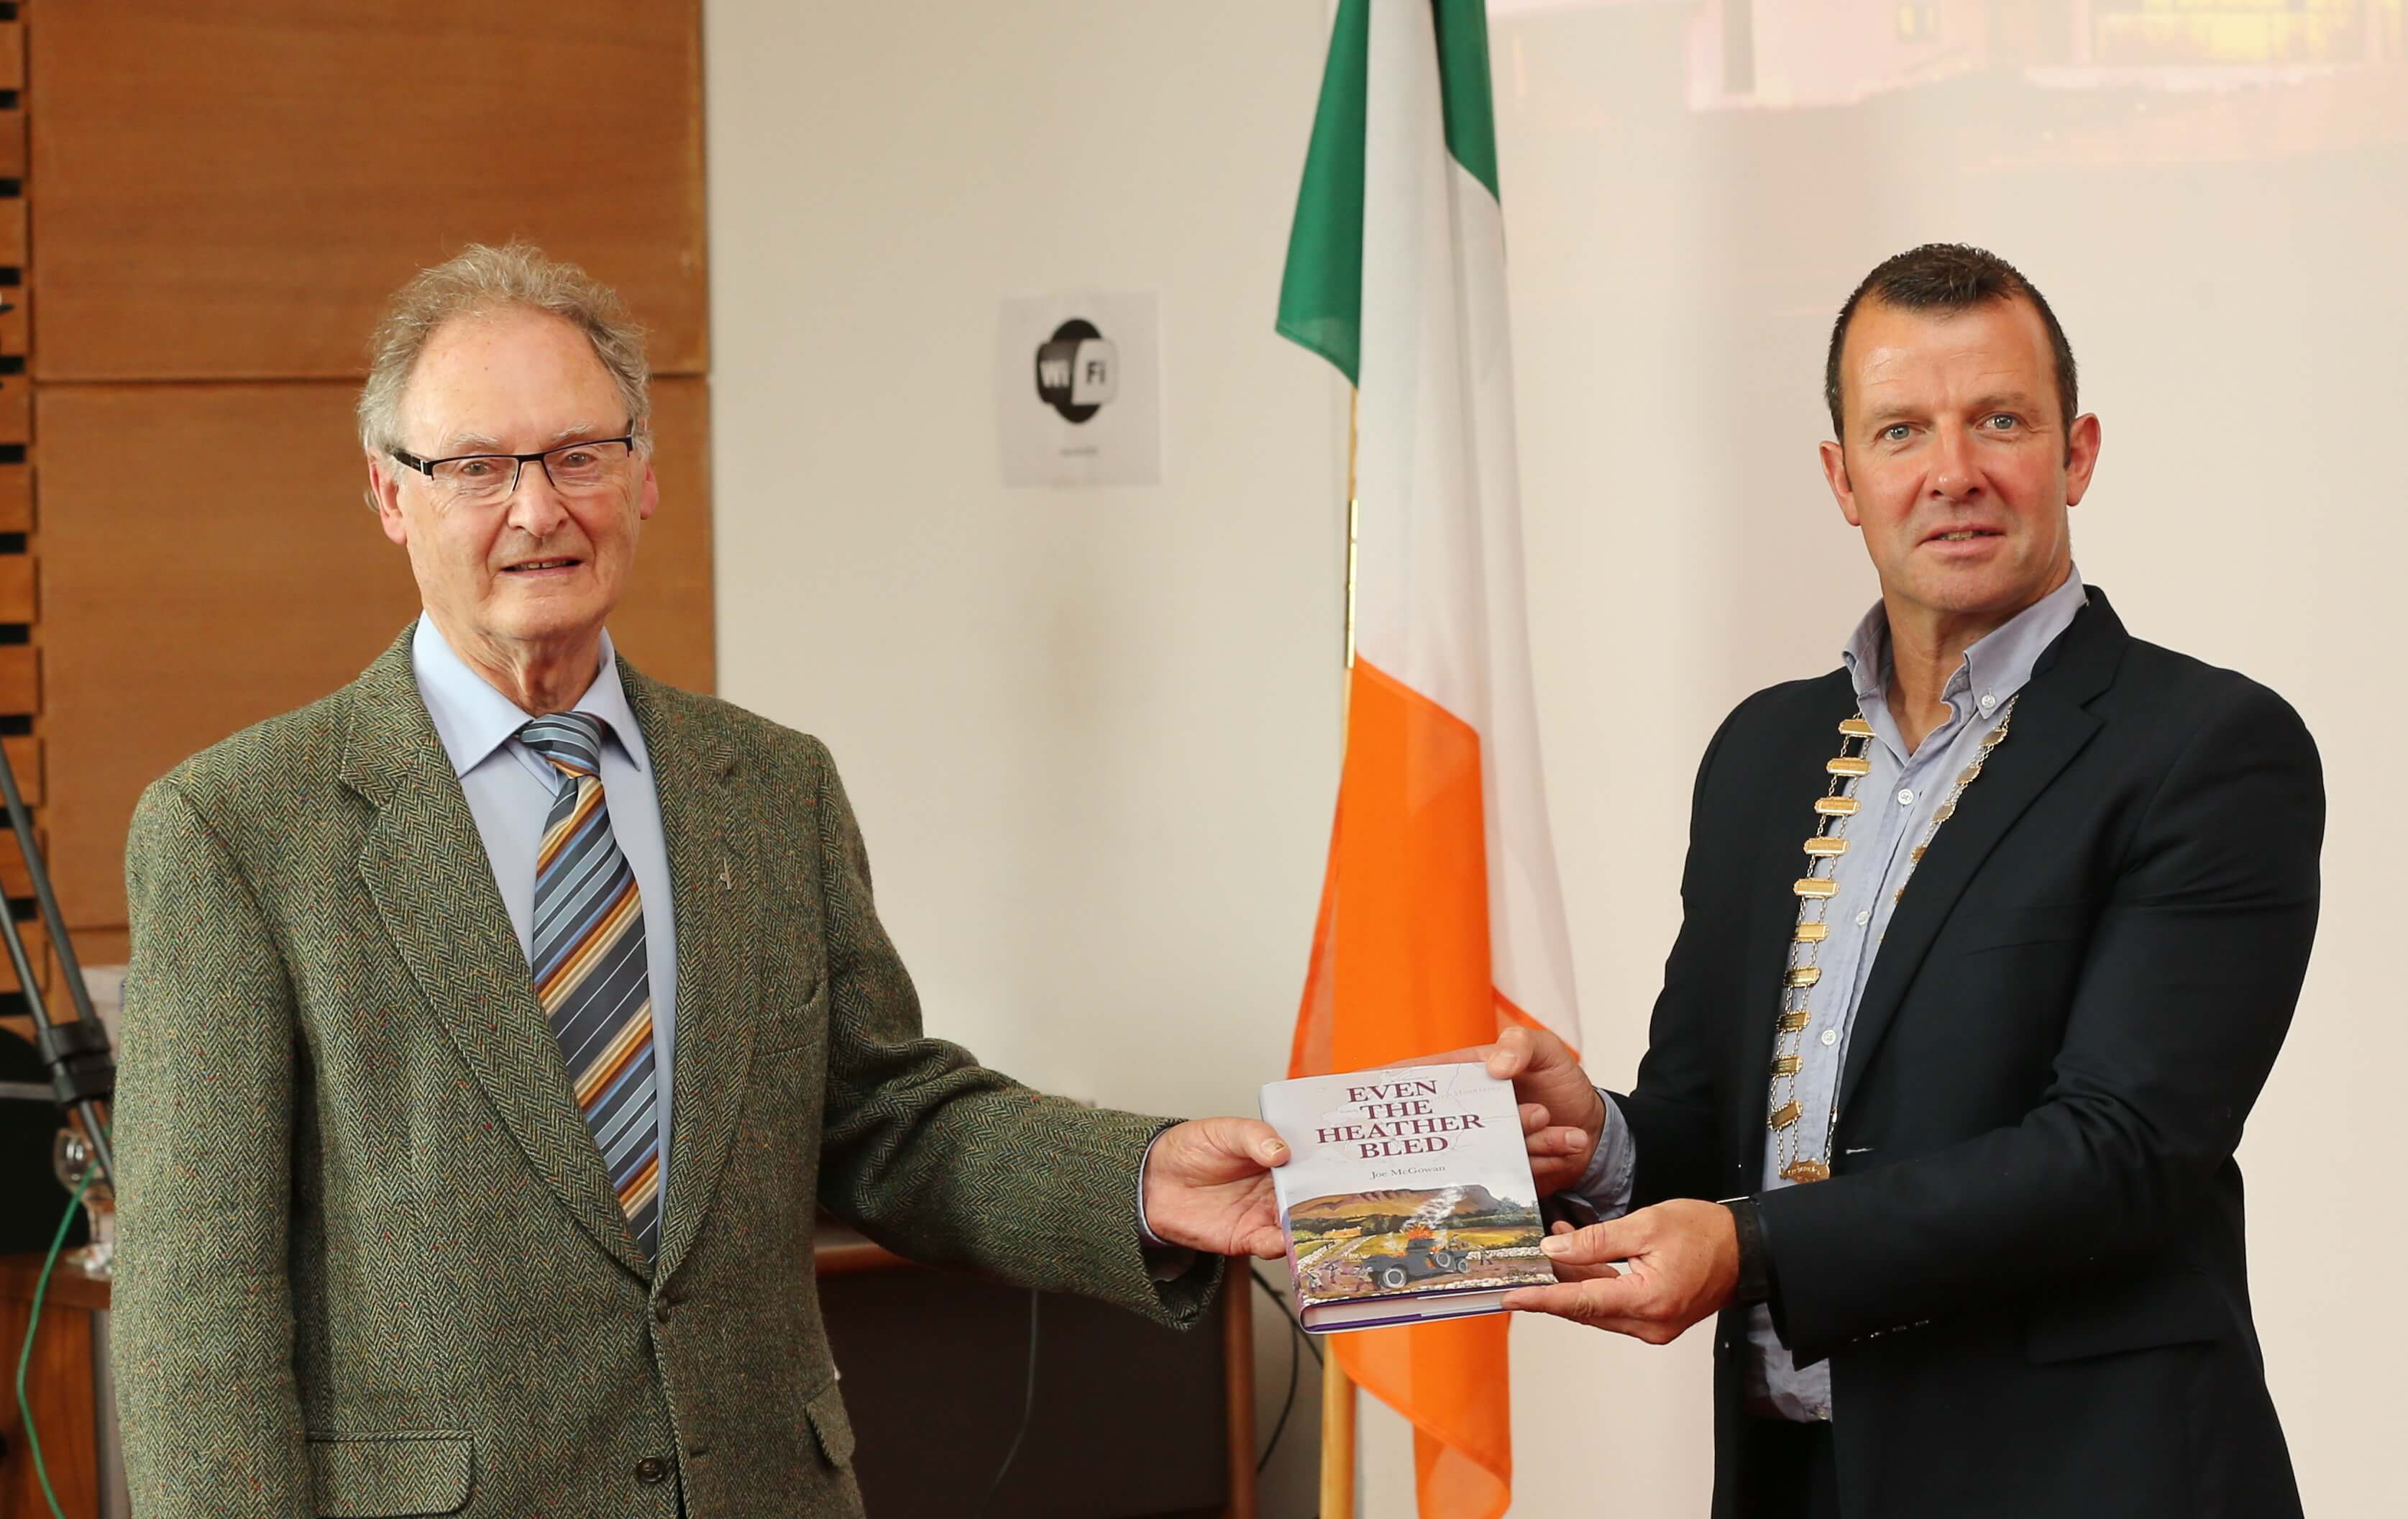 New publication by Joe McGowan launched at County Hall